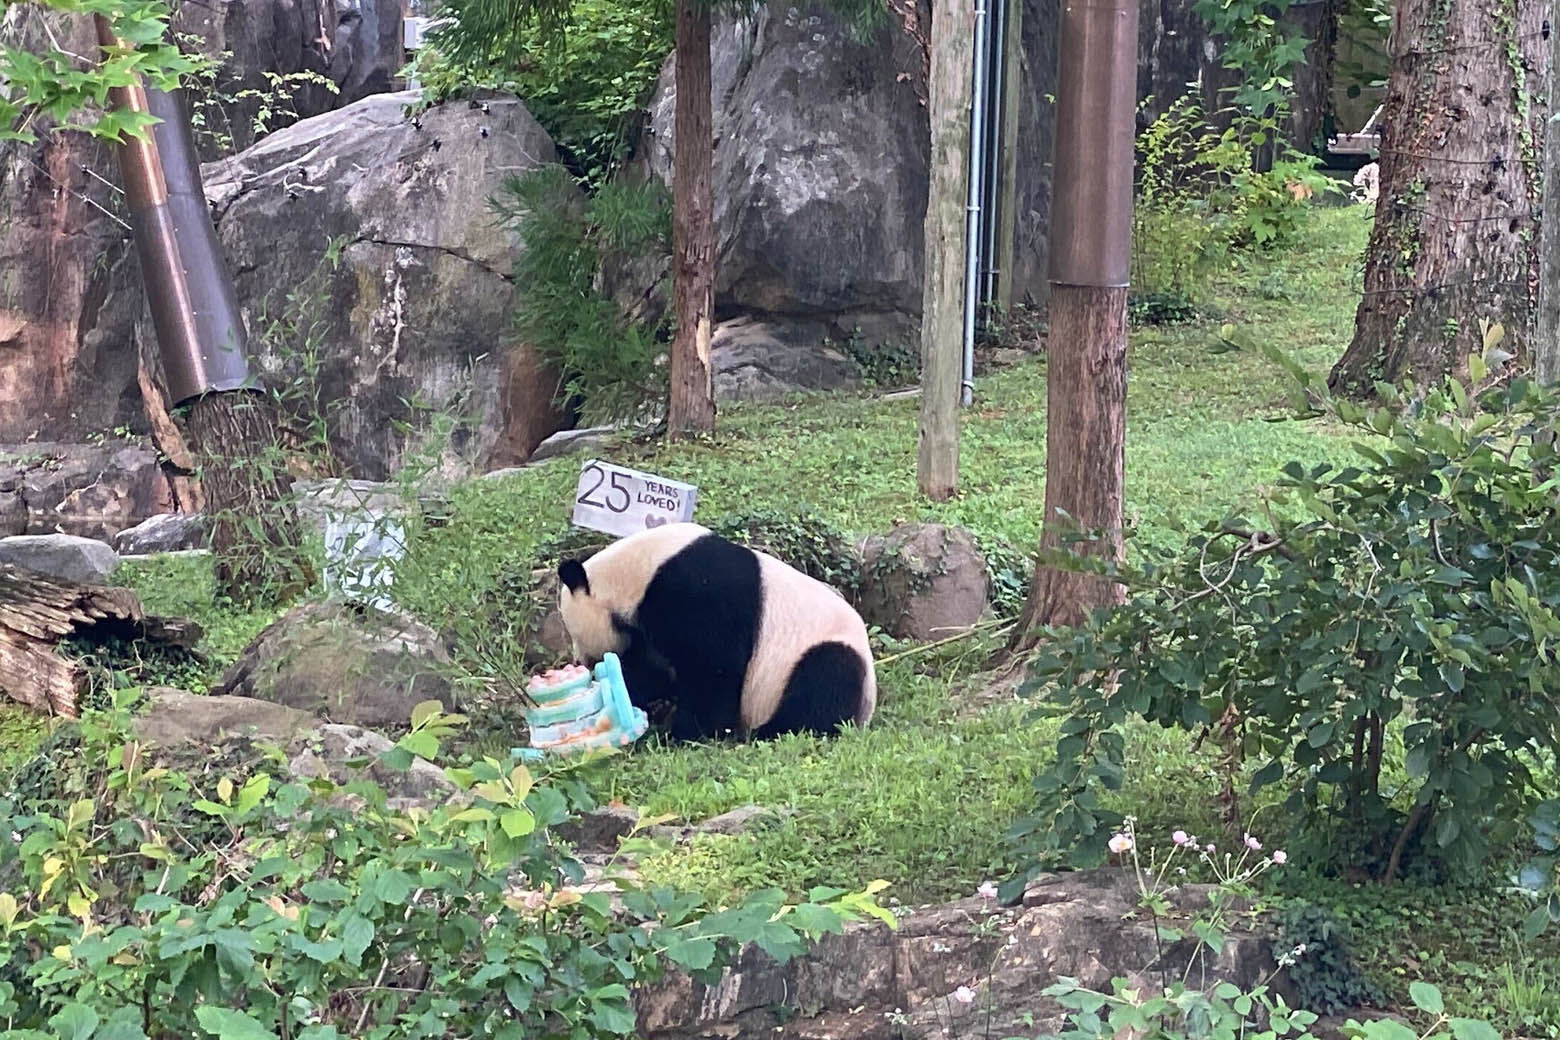 Mei Xiang, meaning “beautiful fragrance," was born in 1998 at the China Research and Conservation Center for the Giant Panda in Wolong, Sichuan Province. (WTOP/Luke Lukert)